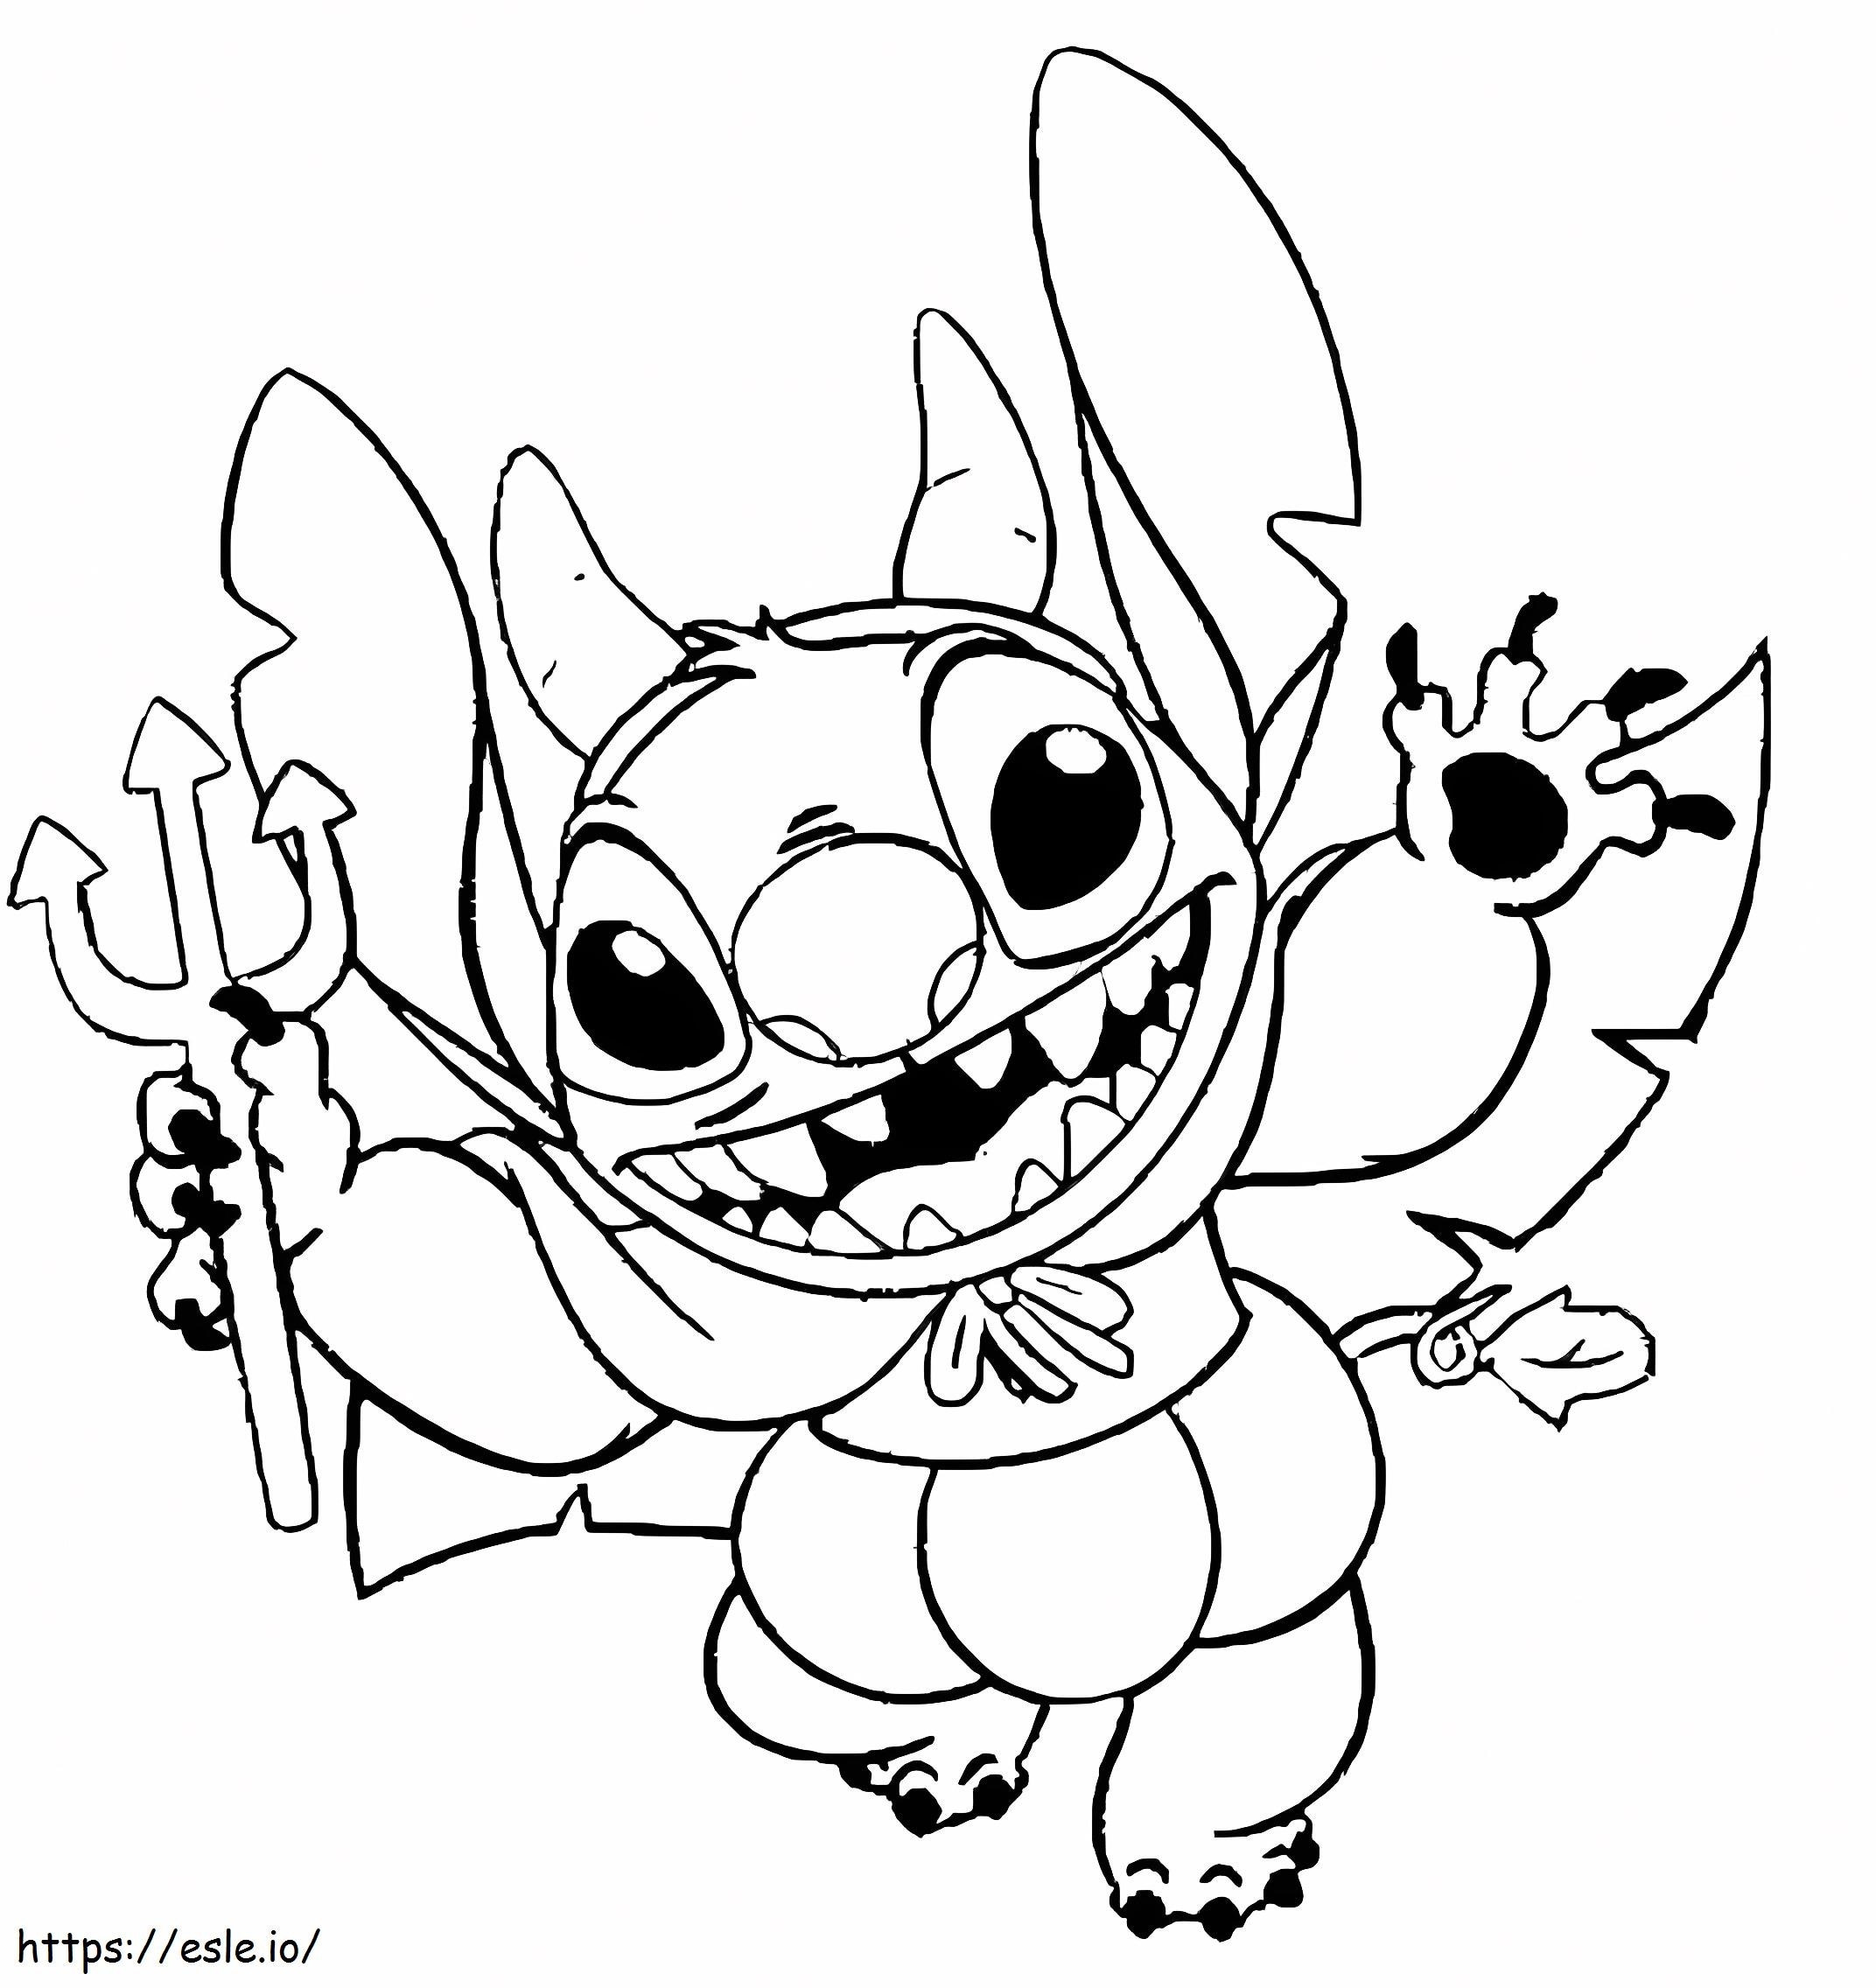 Stitch On Halloween coloring page